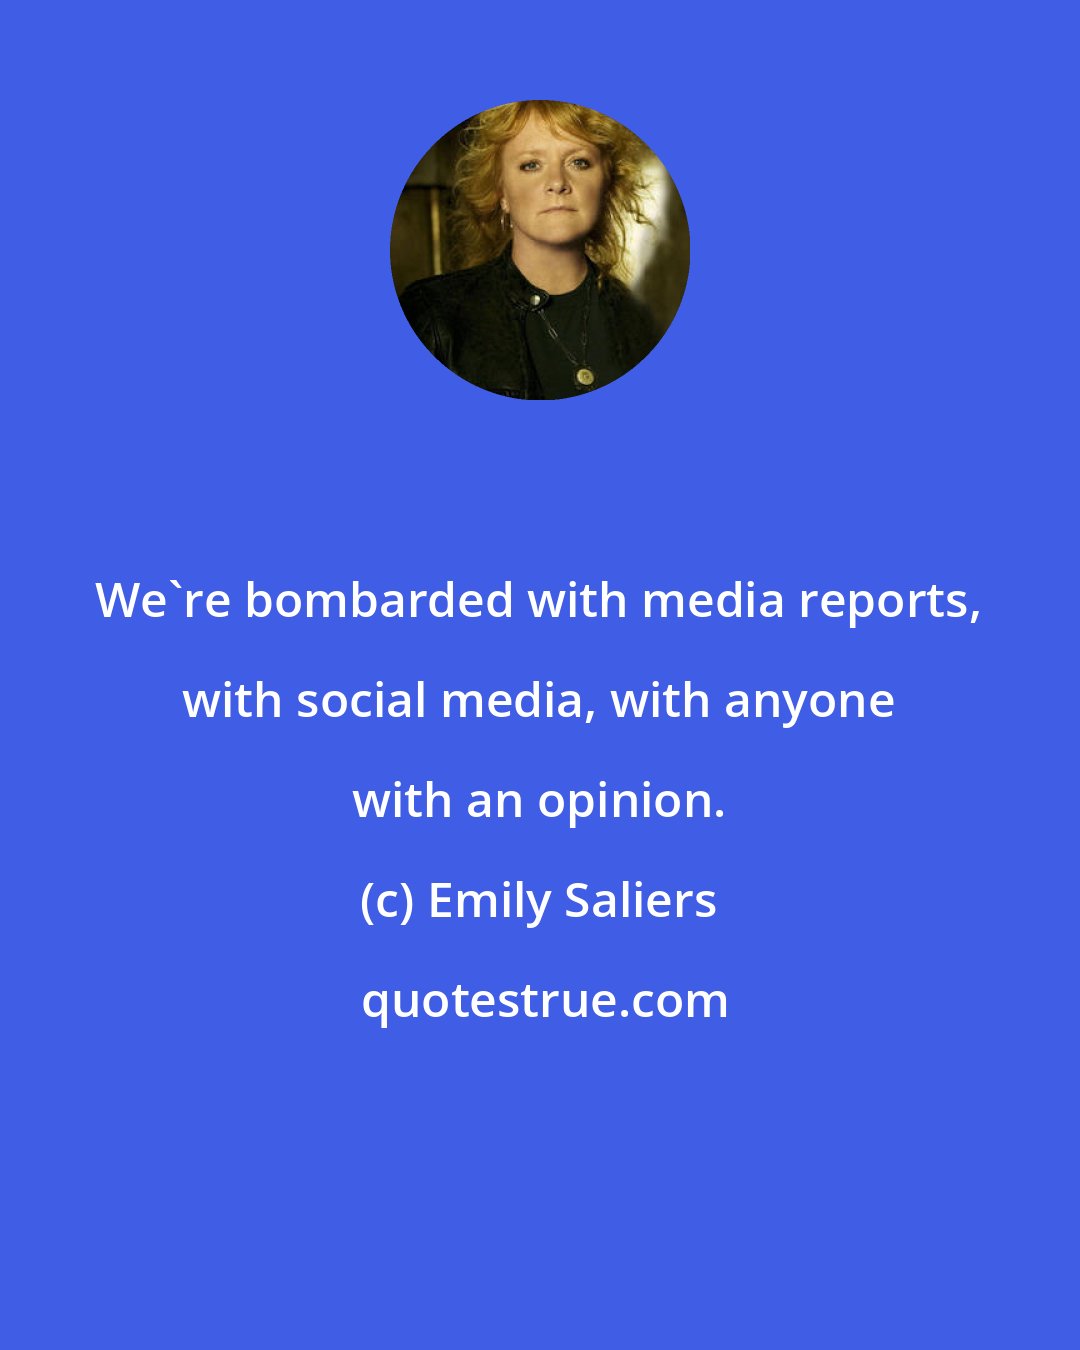 Emily Saliers: We're bombarded with media reports, with social media, with anyone with an opinion.